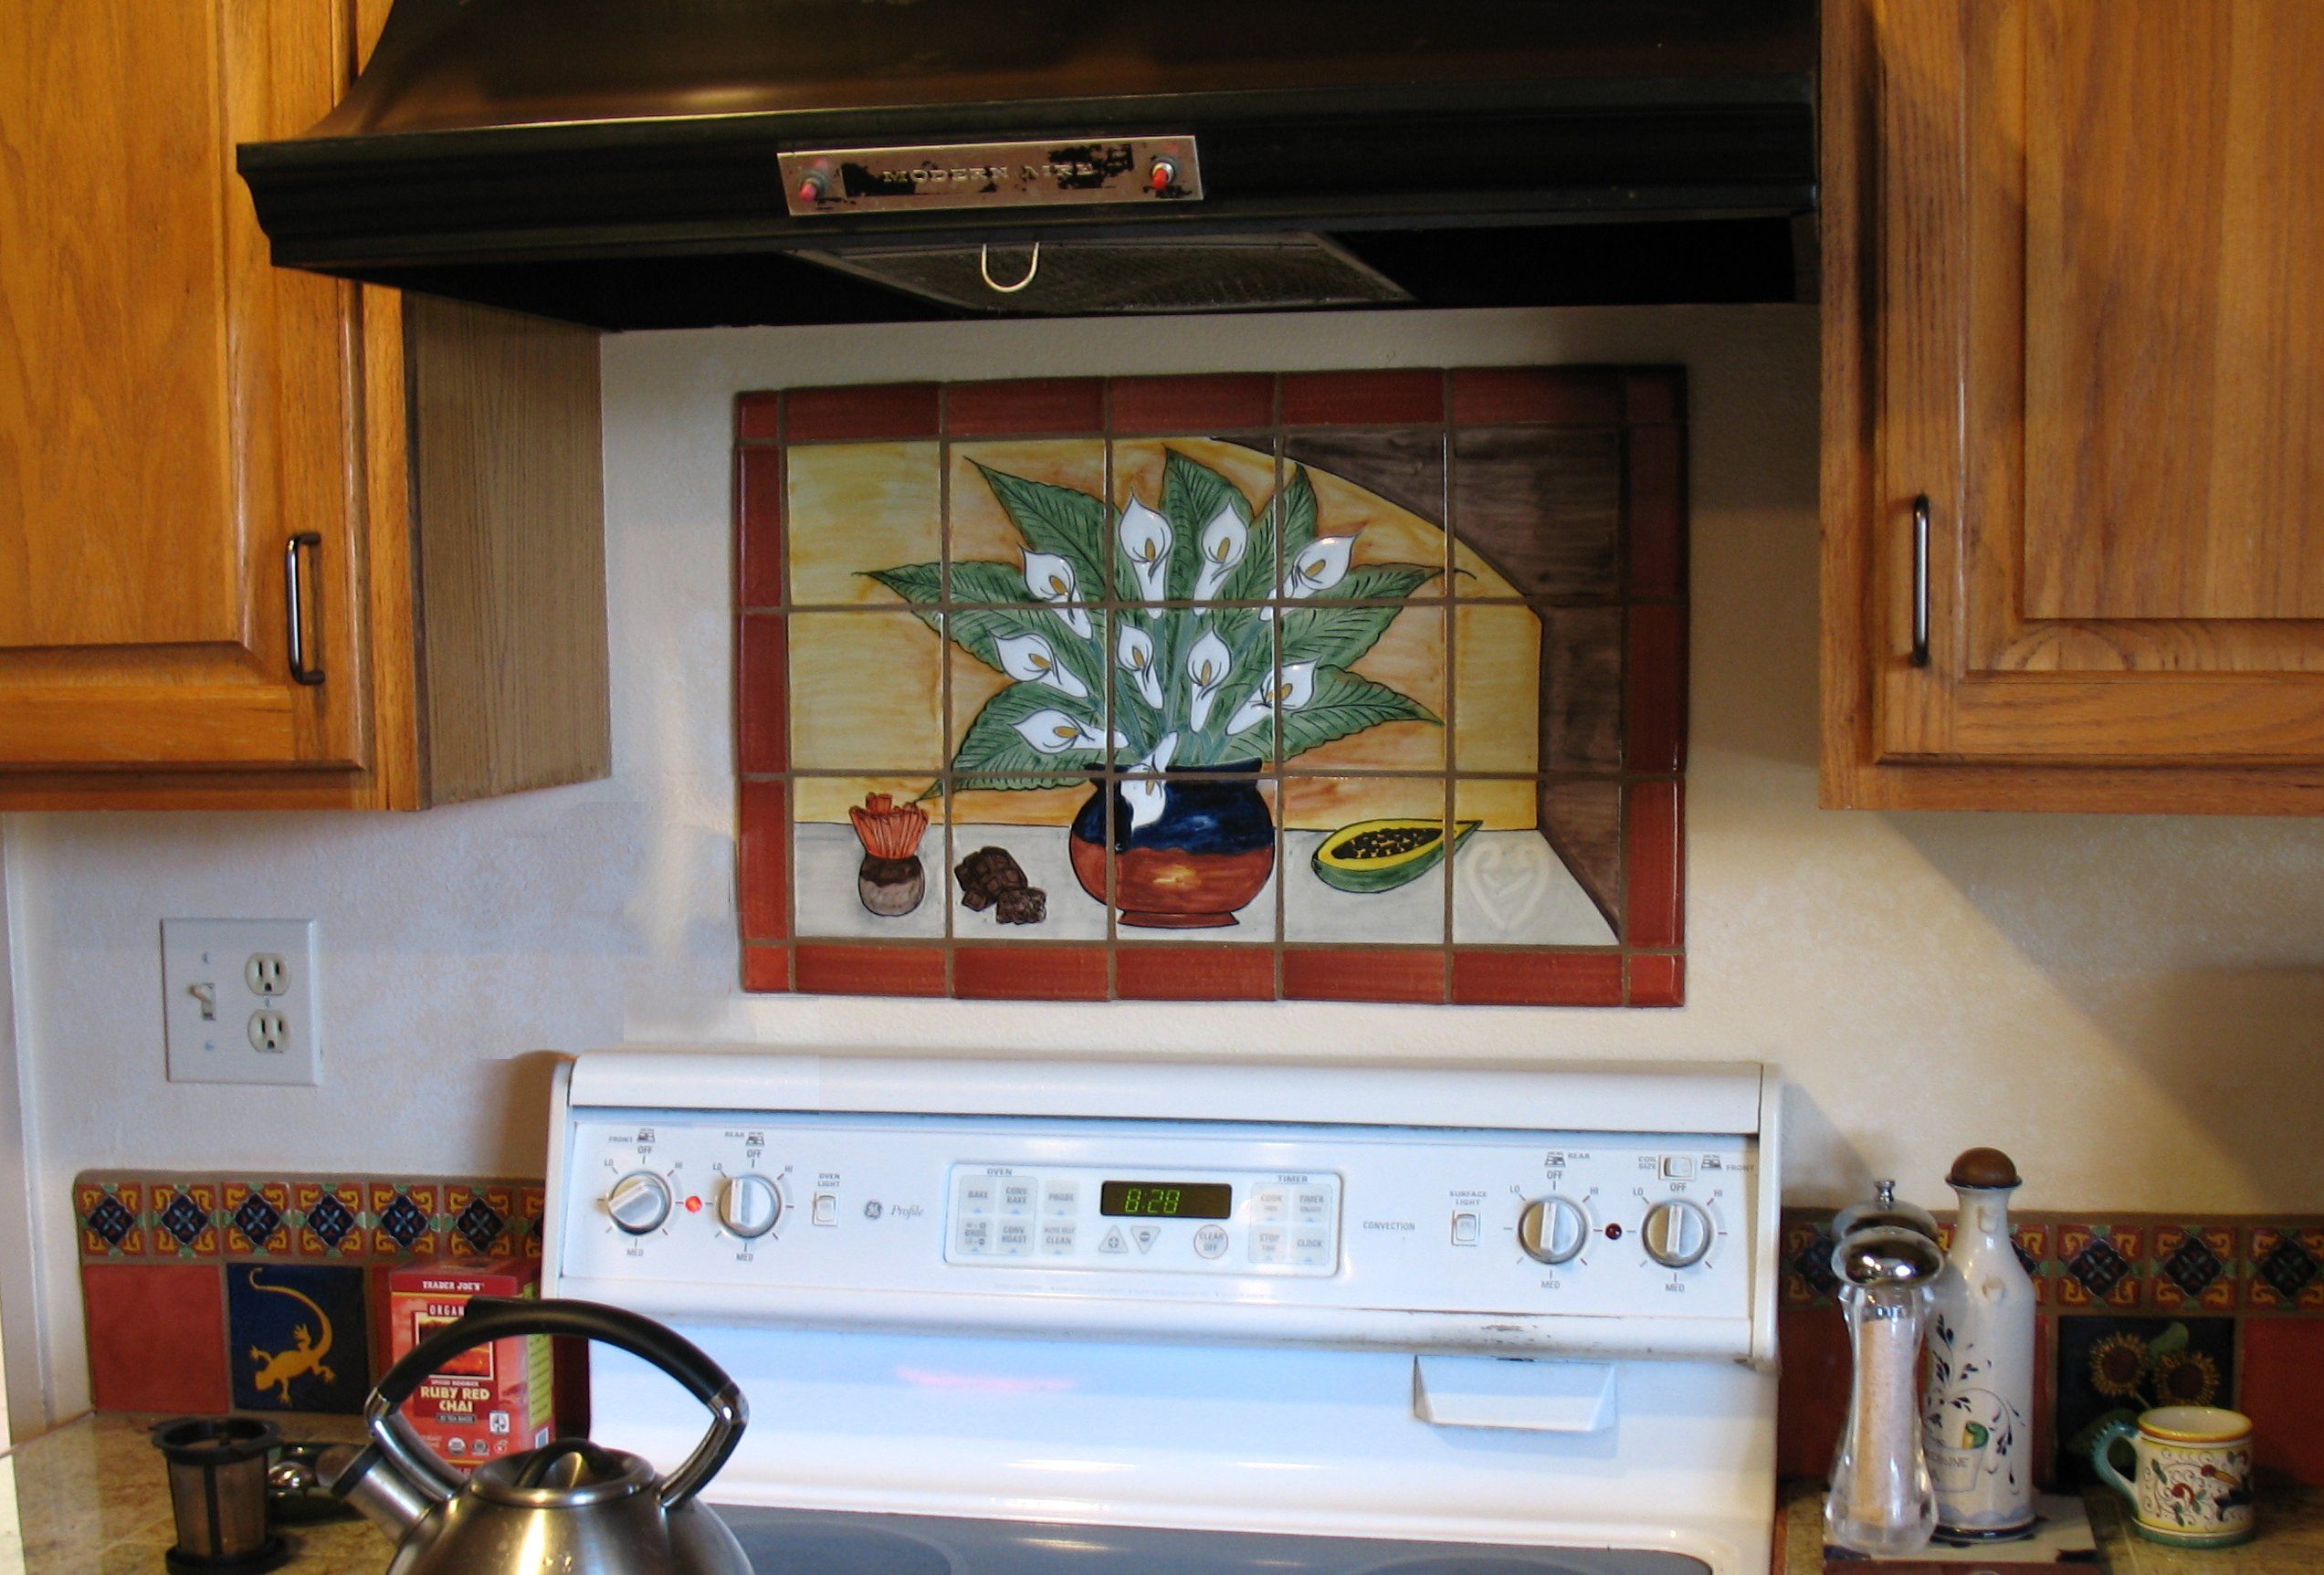 hand painted ceramic tile mural from Mexico decorating a kitchen backsplash wall